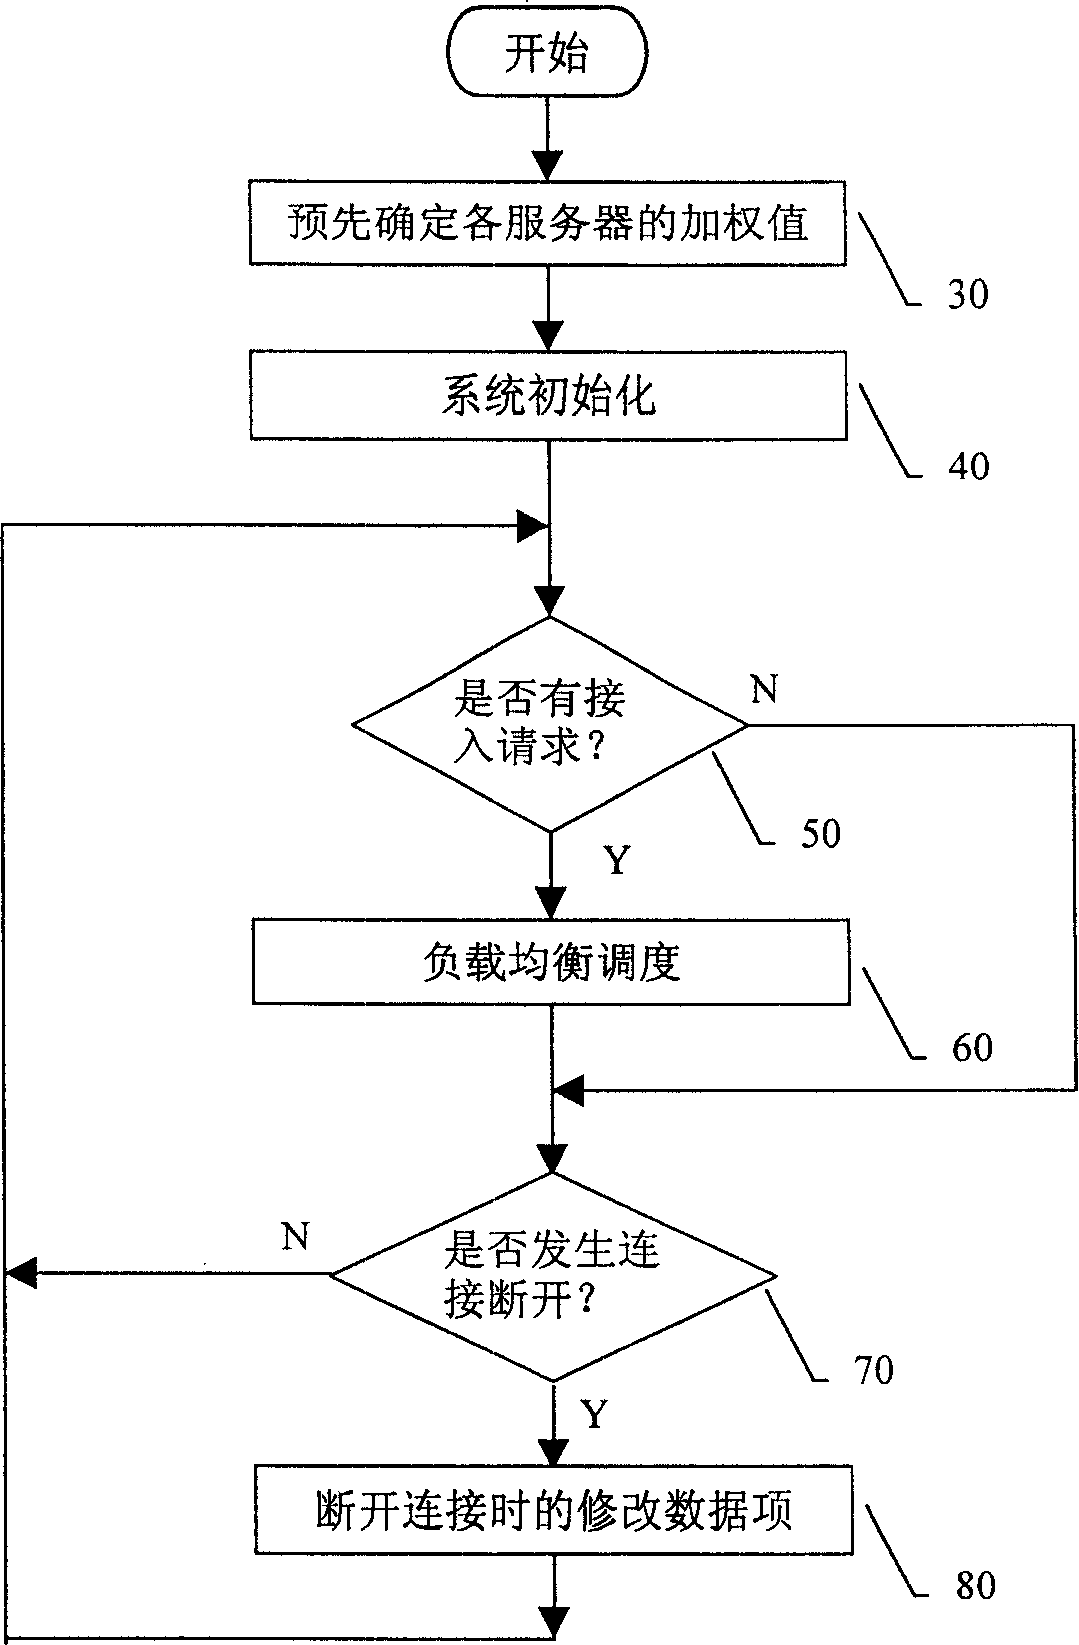 Server load equalization method for implementing weighted minimum linked allocation